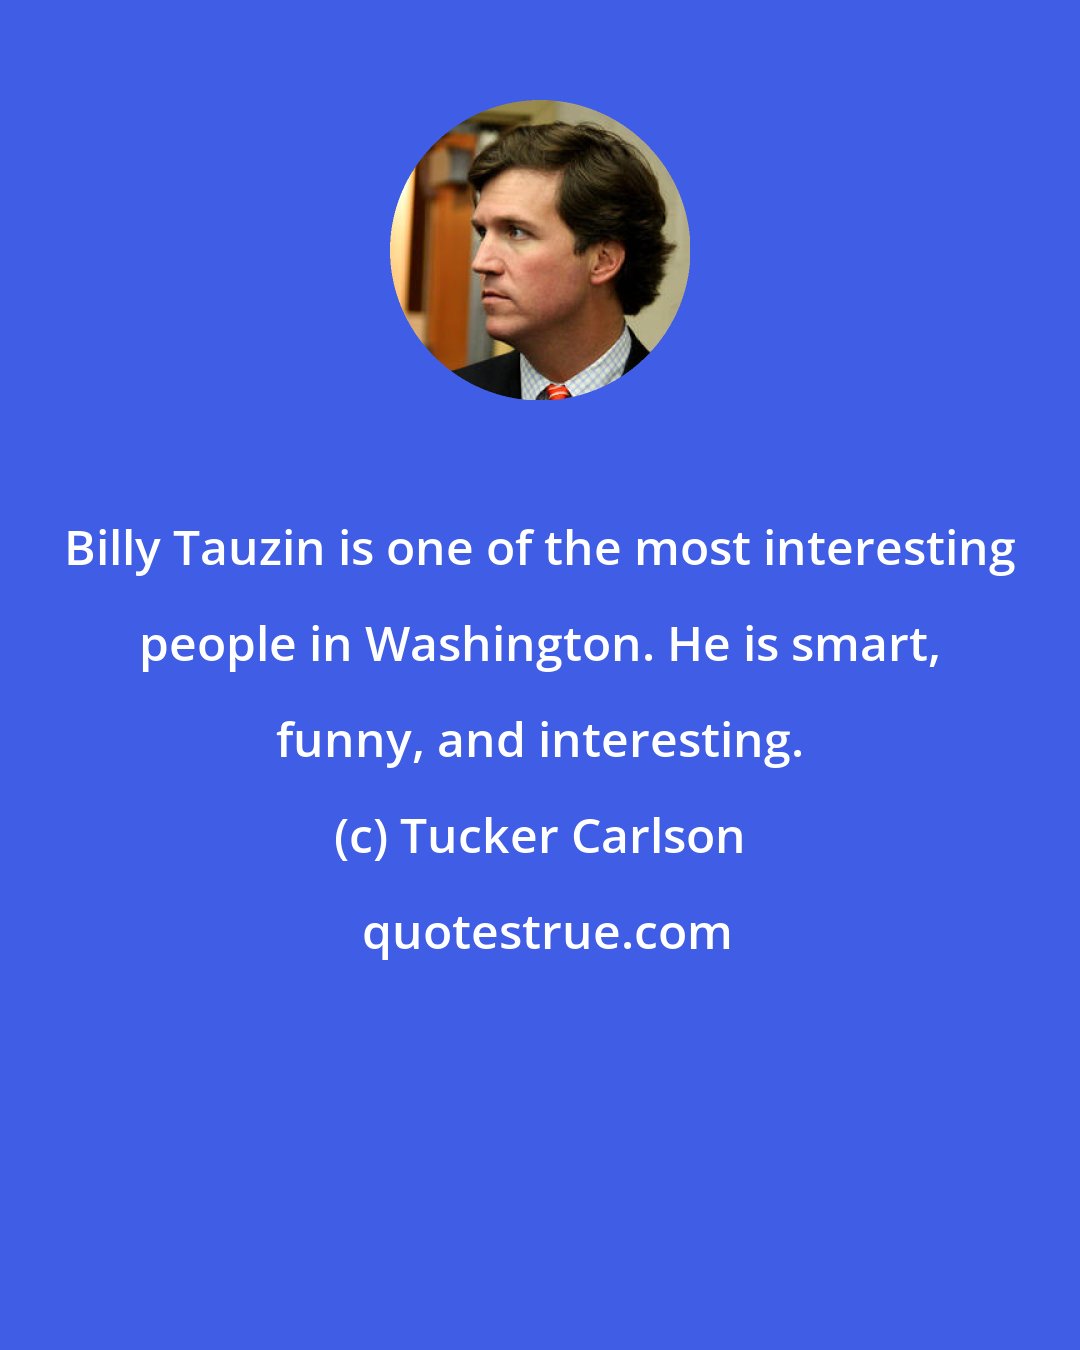 Tucker Carlson: Billy Tauzin is one of the most interesting people in Washington. He is smart, funny, and interesting.